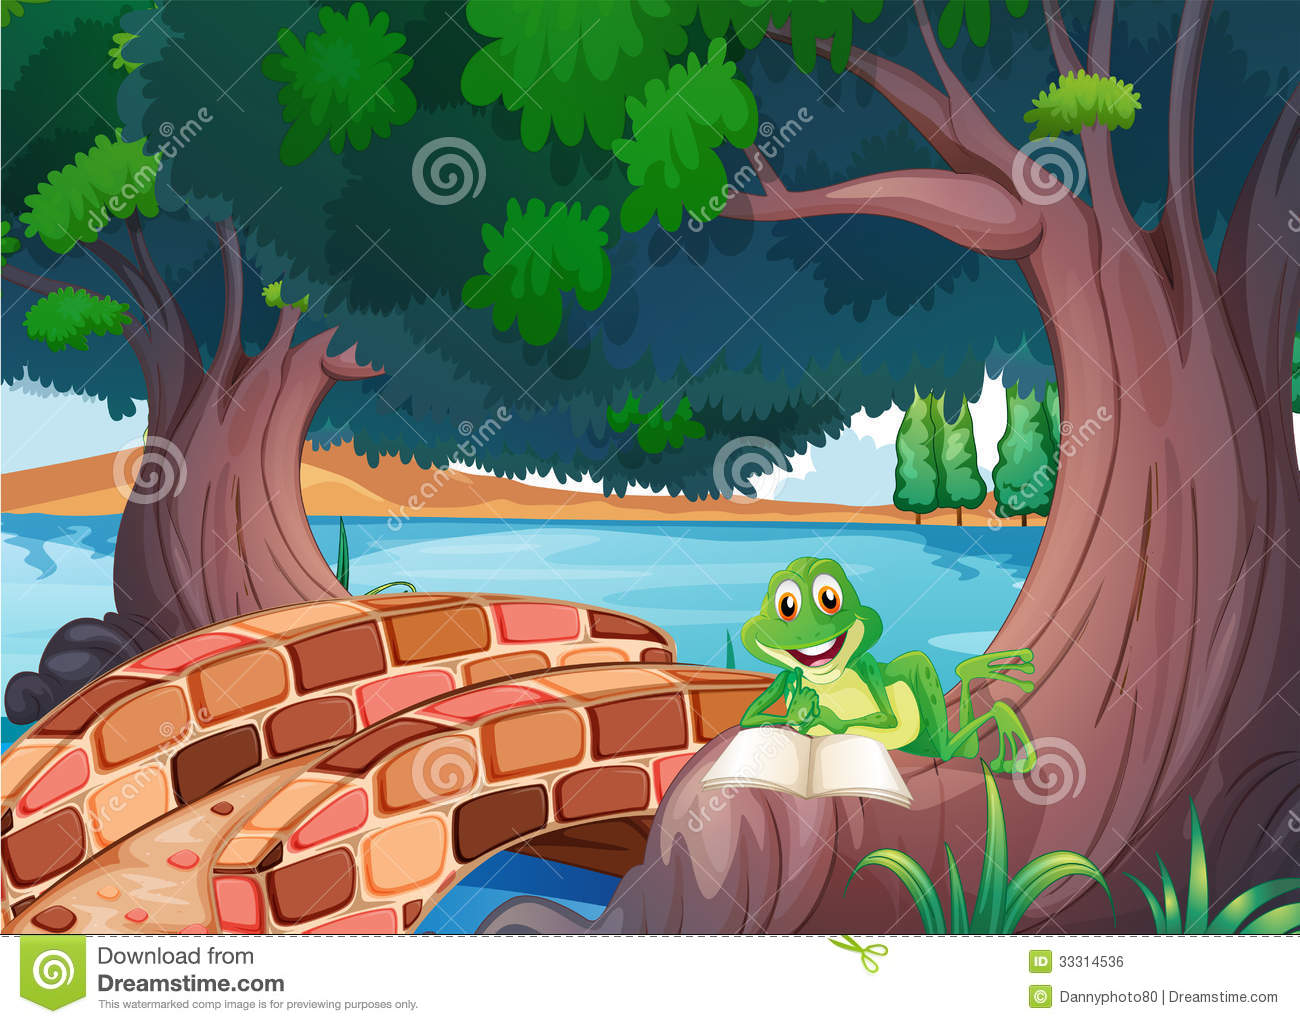 Frog Reading Under The Tree Beside A Bridge Royalty Free Stock Image